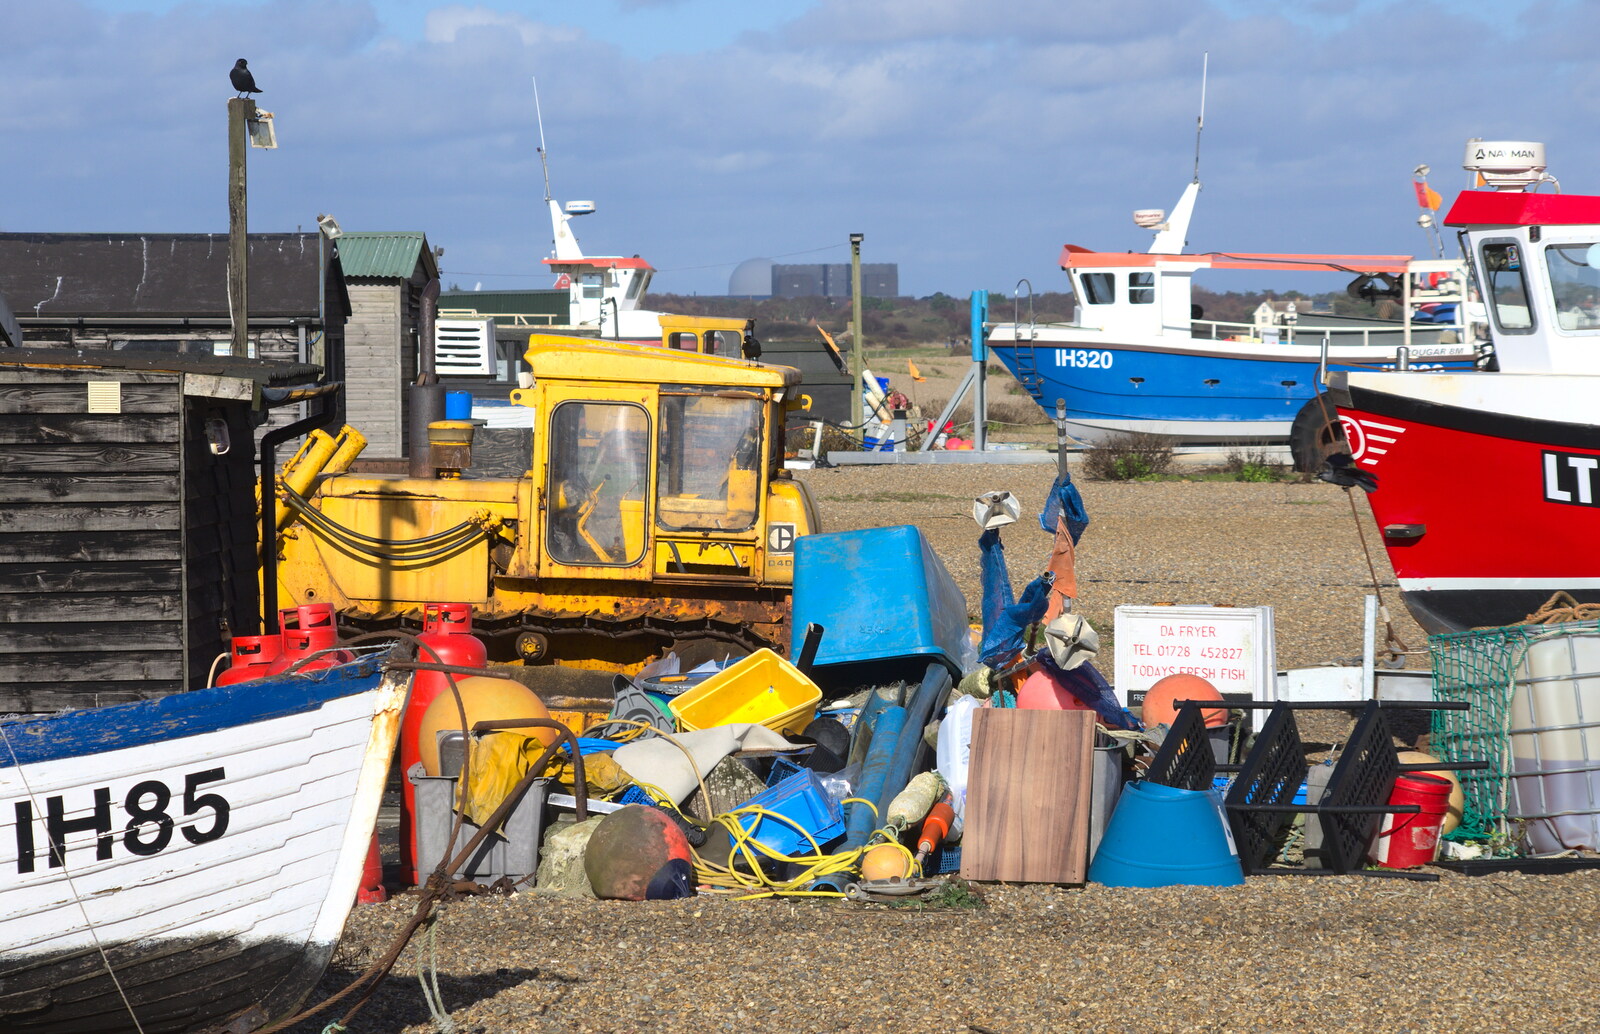 Fishing boats on the beach from A Trip to Aldeburgh, Suffolk - 7th February 2016